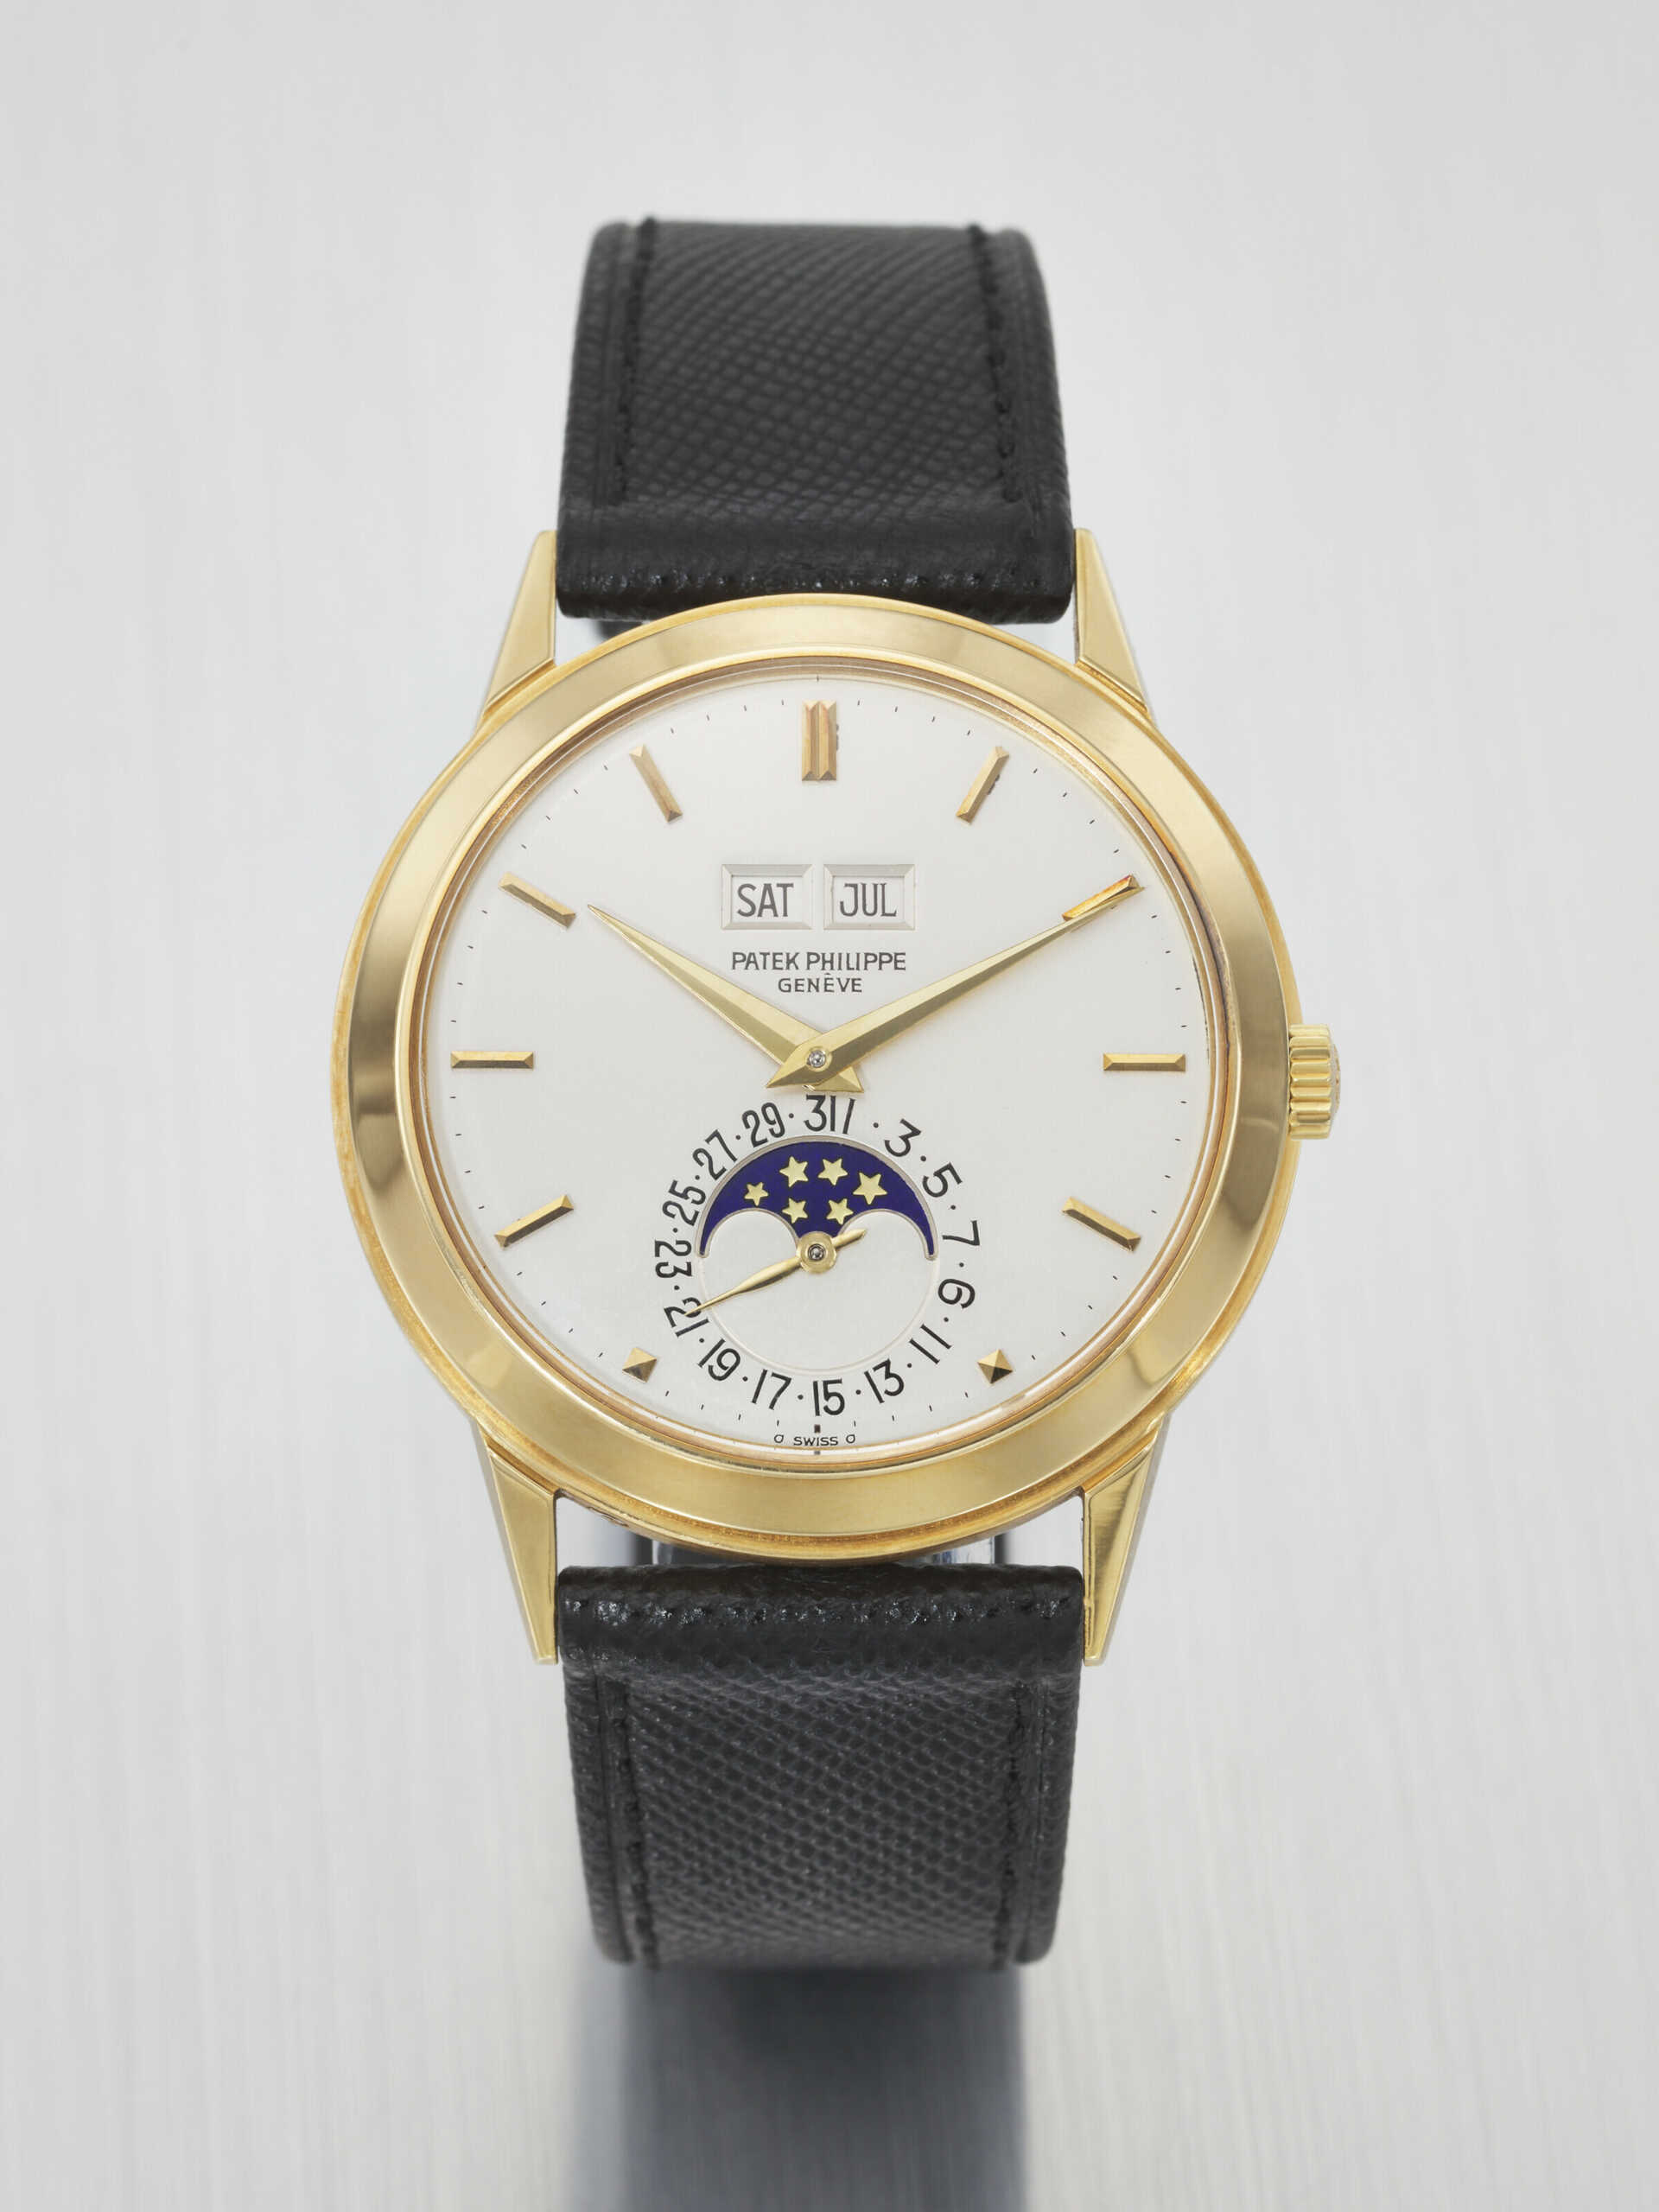 PATEK PHILIPPE. A VERY RARE AND HIGHLY IMPORTANT 18K GOLD AUTOMATIC PERPETUAL CALENDAR WRISTWATCH WITH MOON PHASES, FORMERLY TO PROPERTY OF ANDY WARHOL